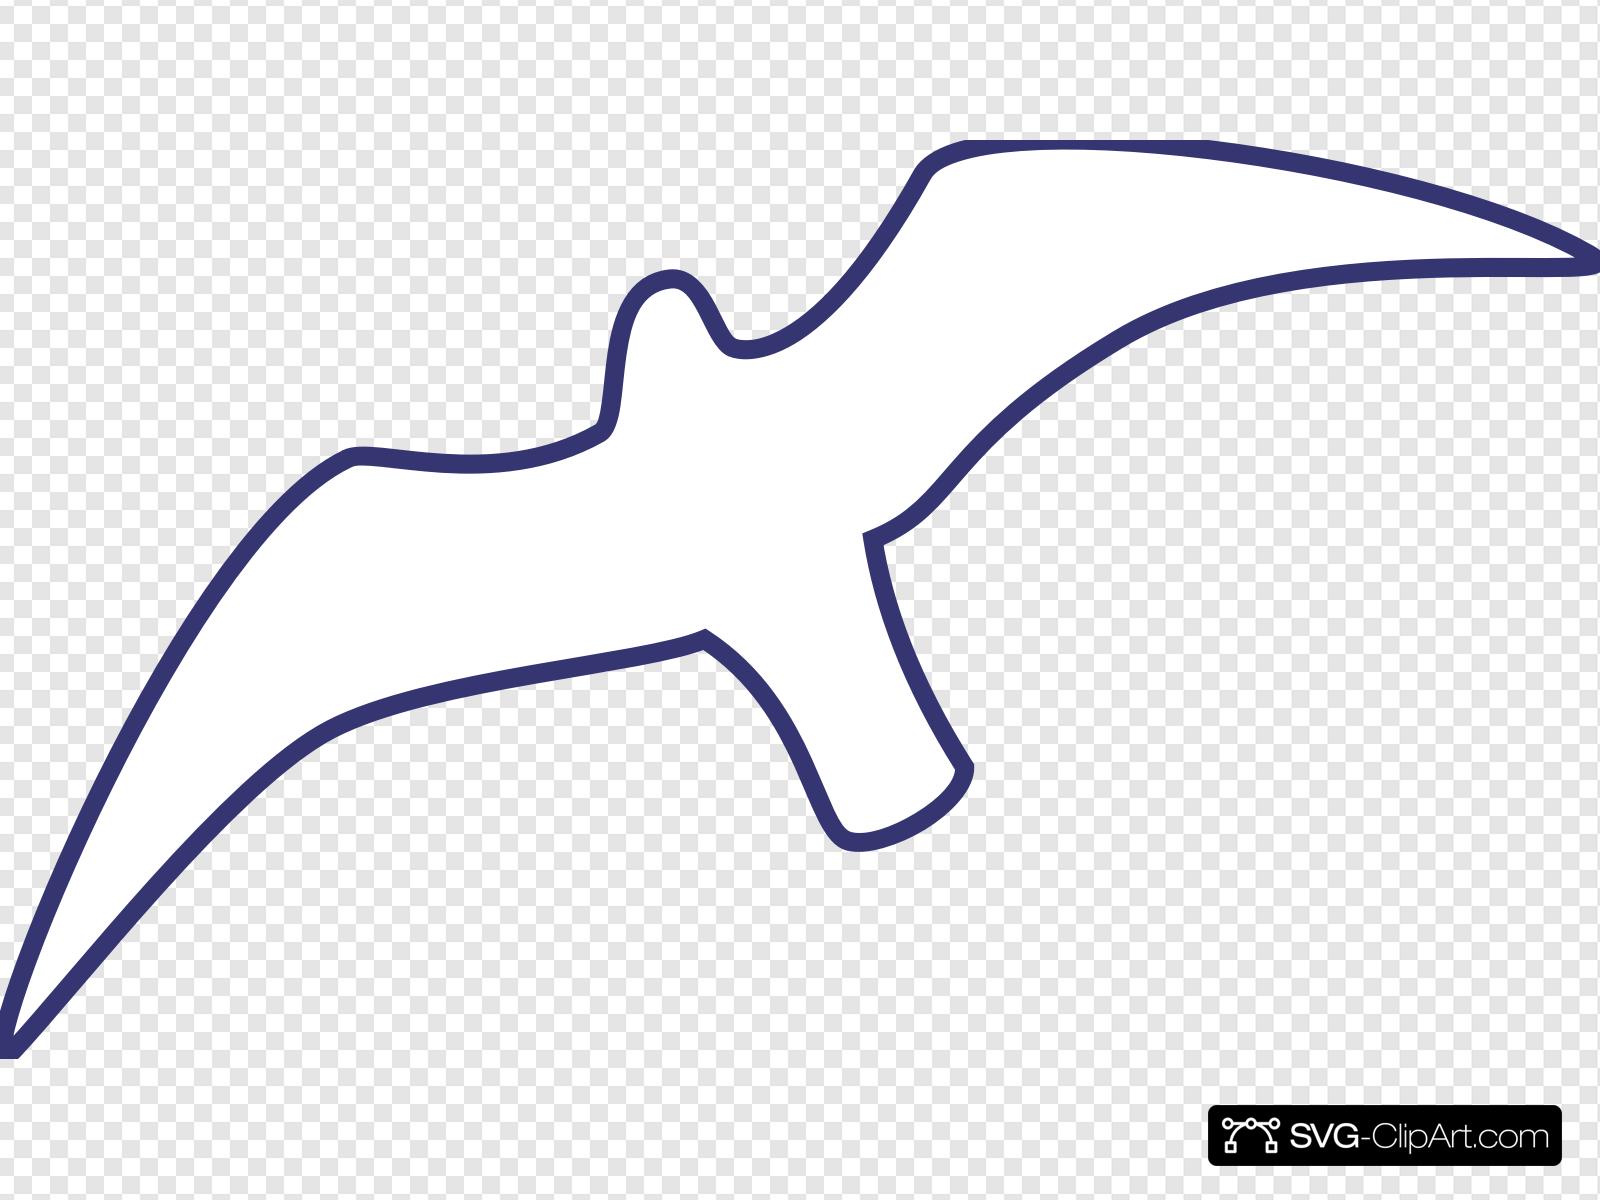 Seagull Outline Line Drawing Clip art, Icon and SVG